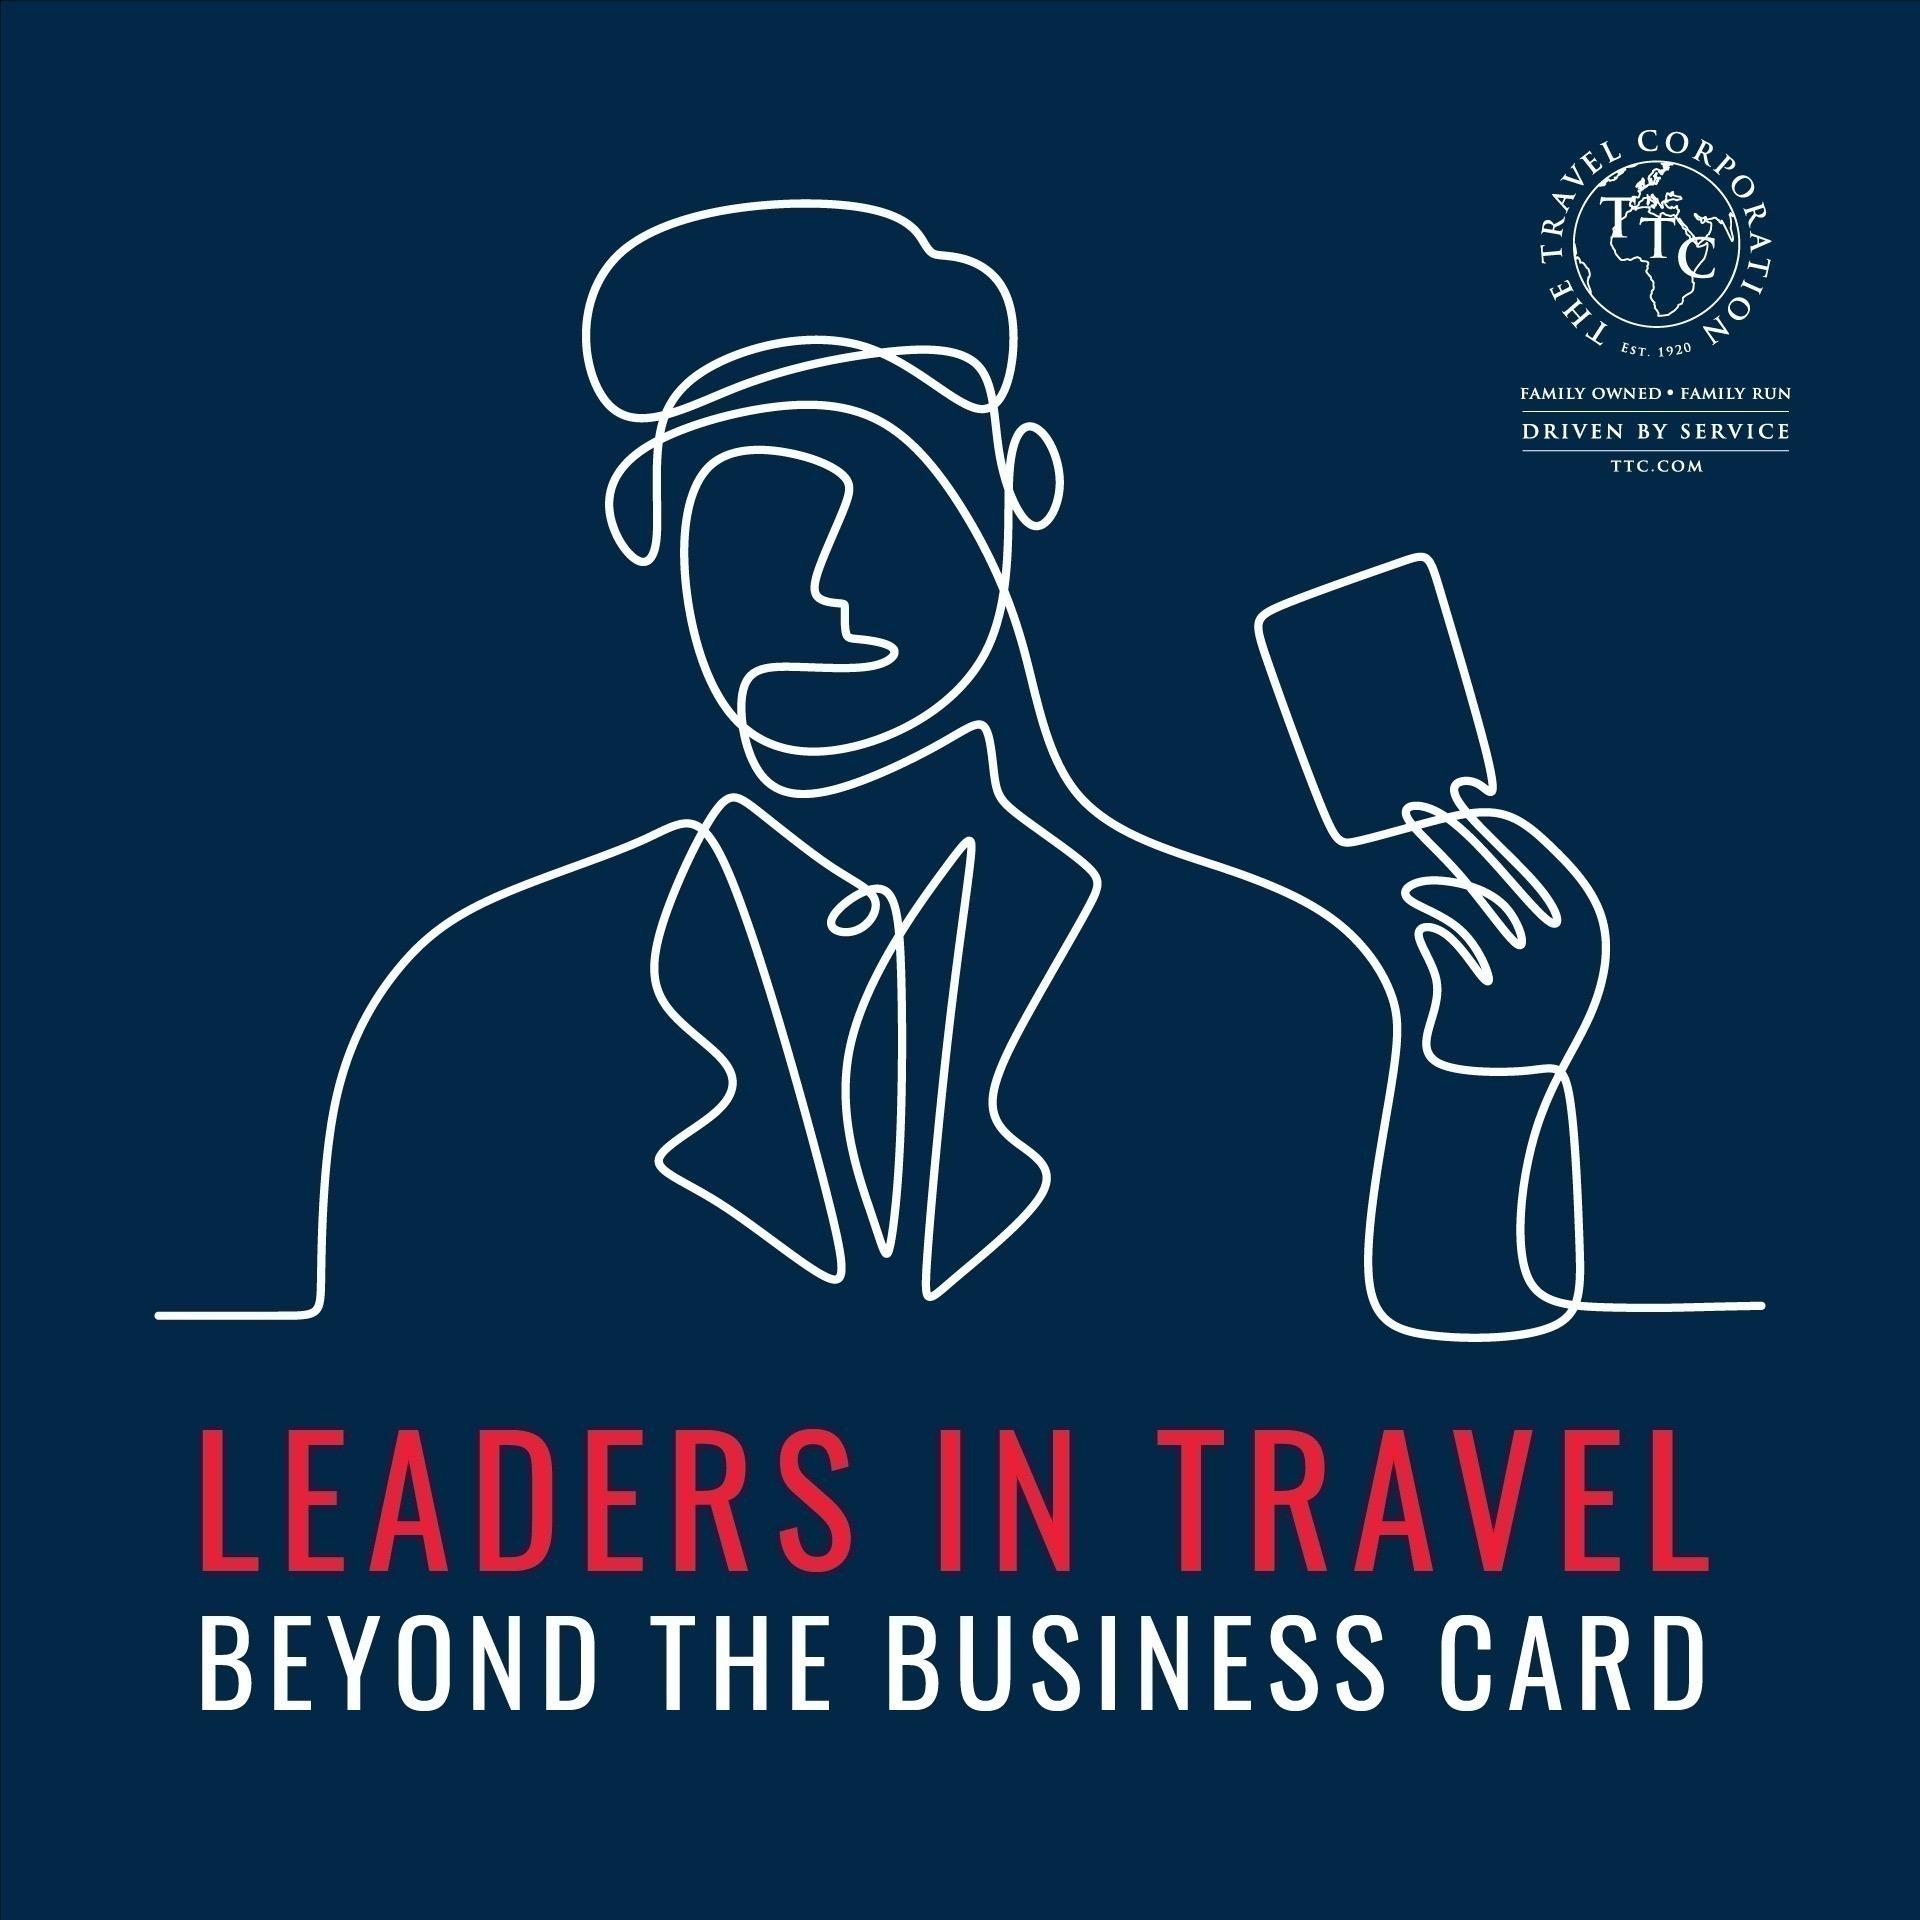 Leaders in Travel: Beyond the Business Card